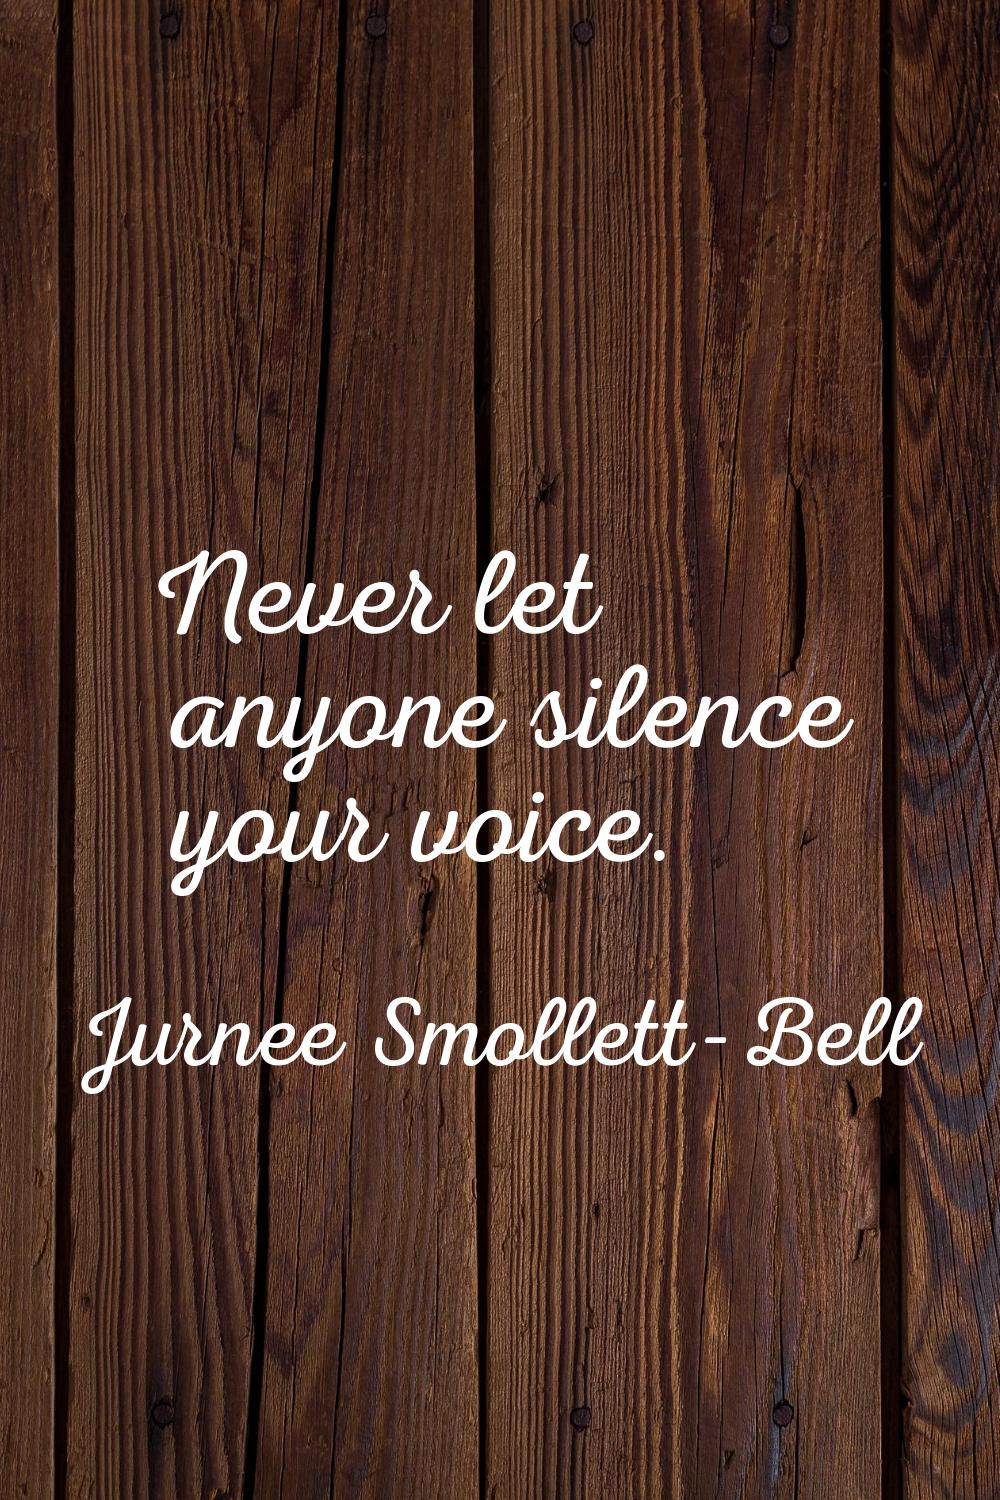 Never let anyone silence your voice.